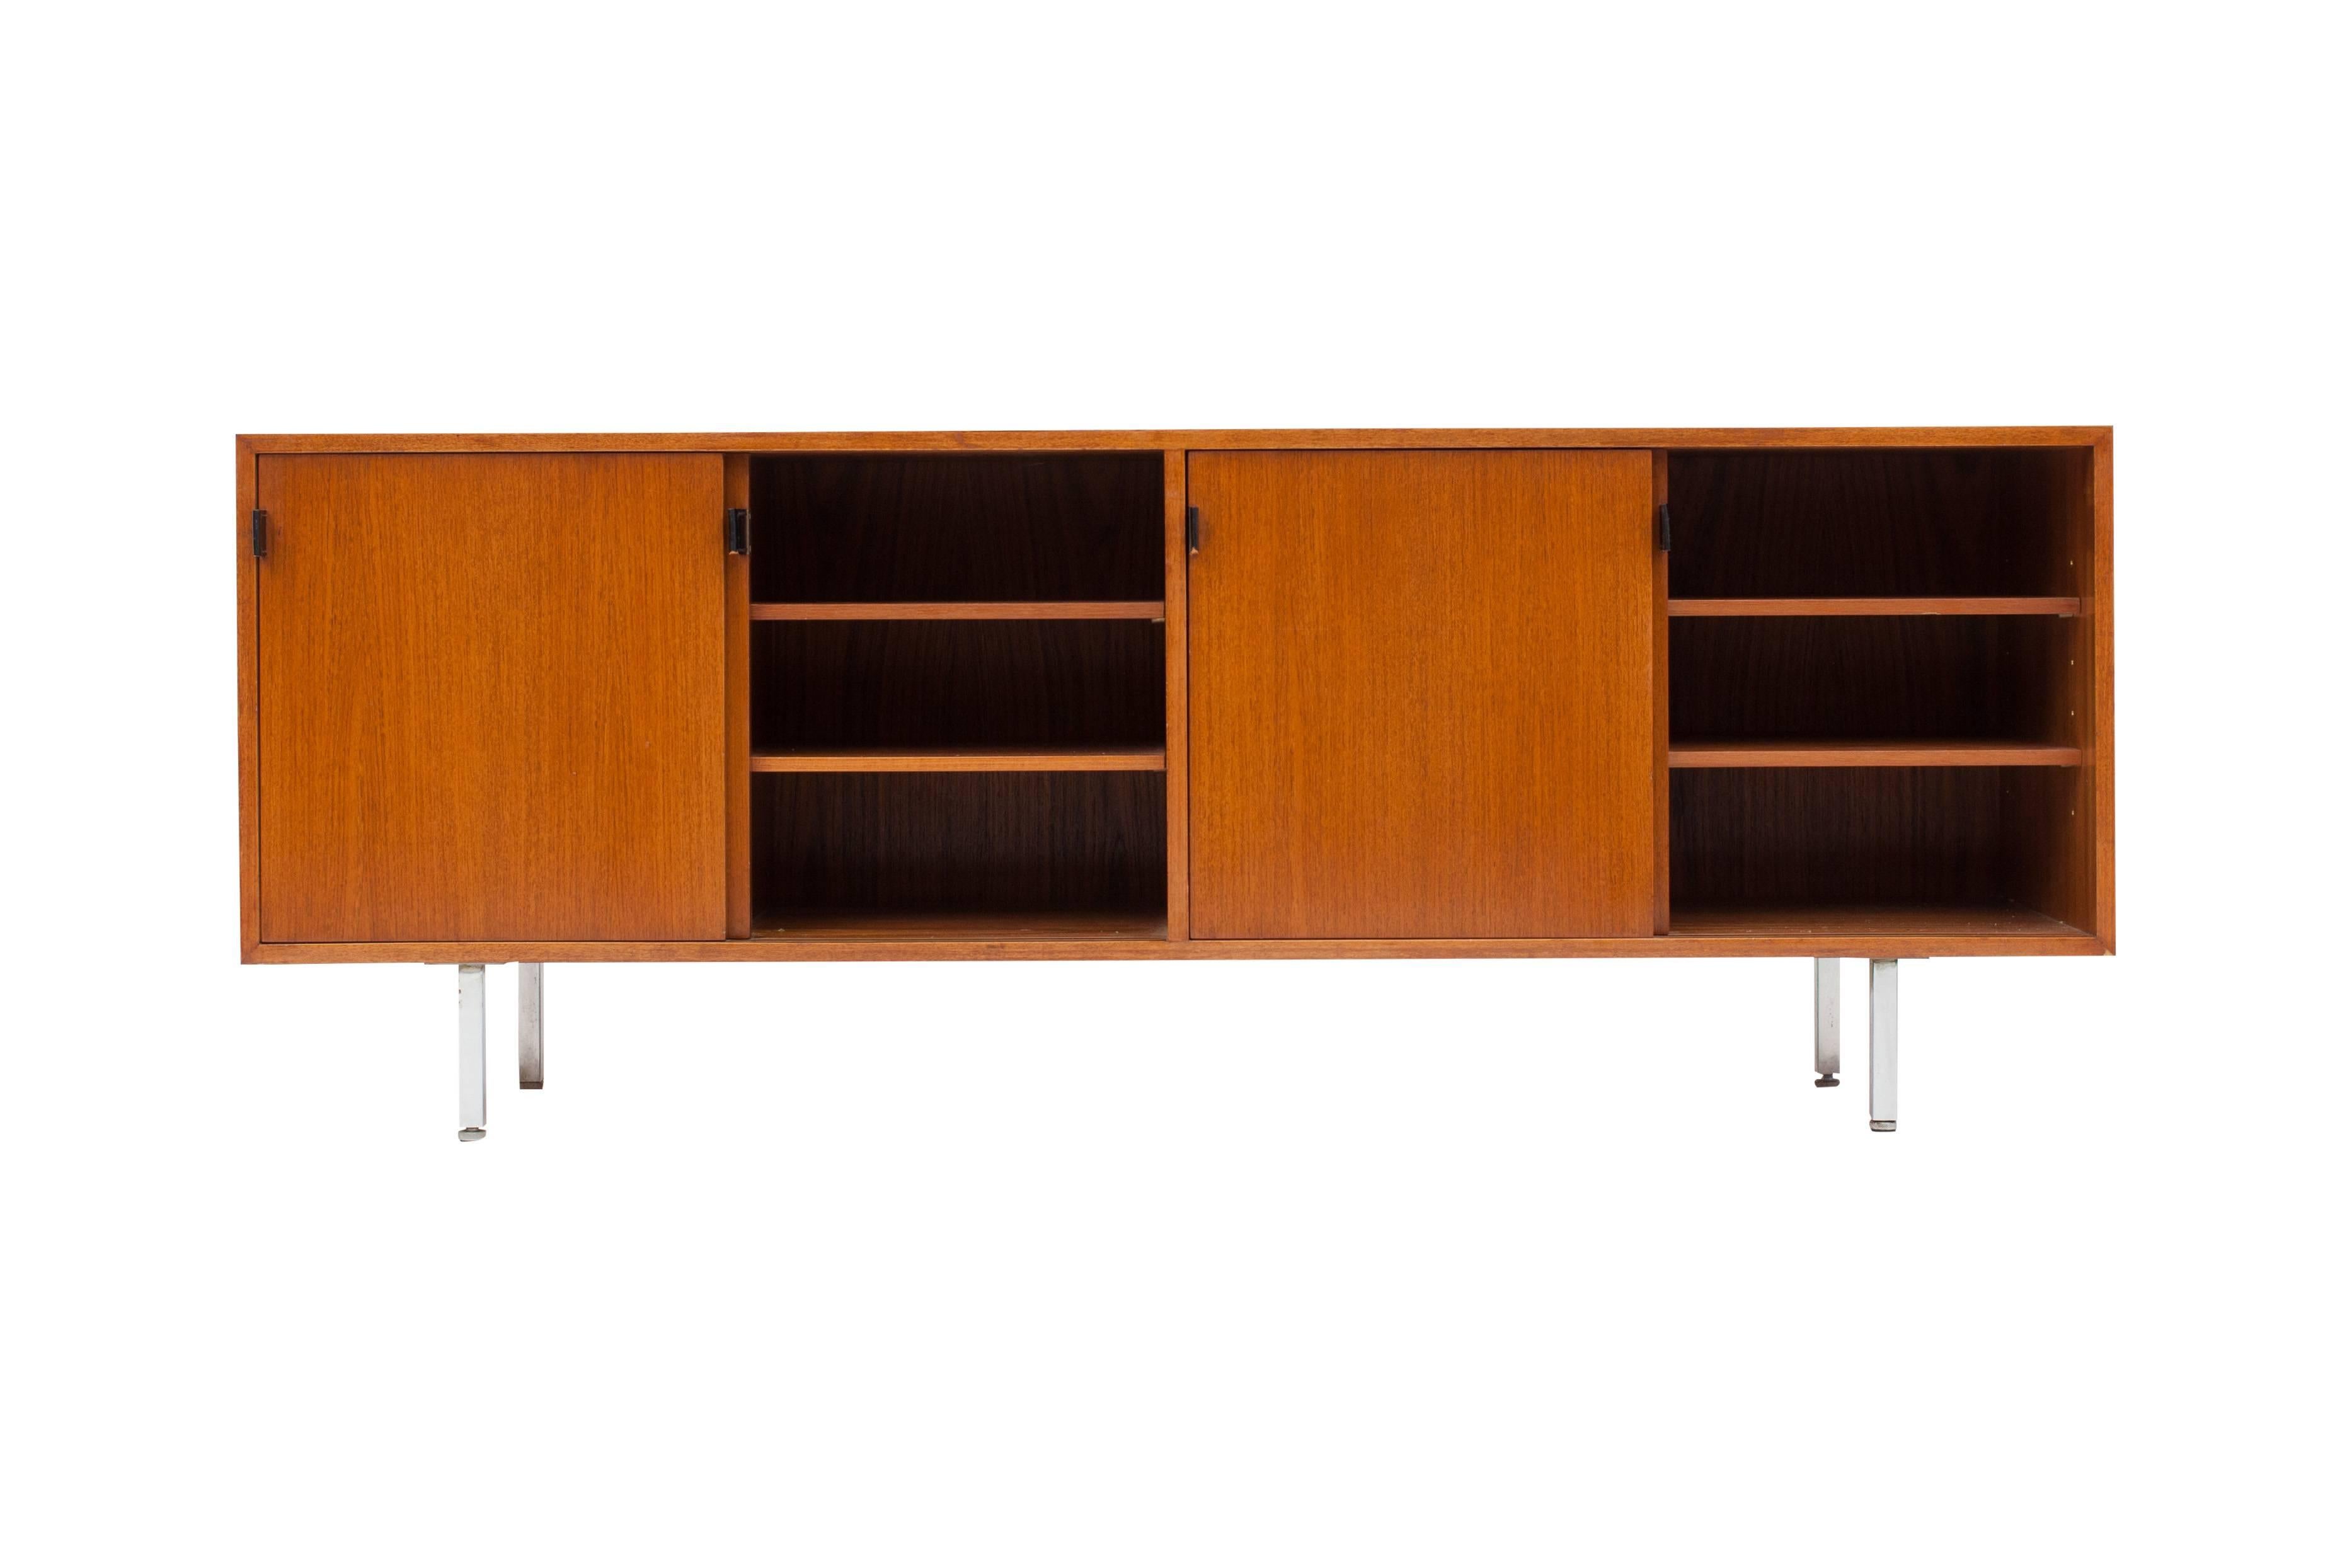 Design Classic by Florence Knoll
The teak credenza has four sliding doors, each provided with
elegant and beautifully patinated black leather door handles. The cabinets rest on four chrome legs. Please note that the back of the credenza's is also